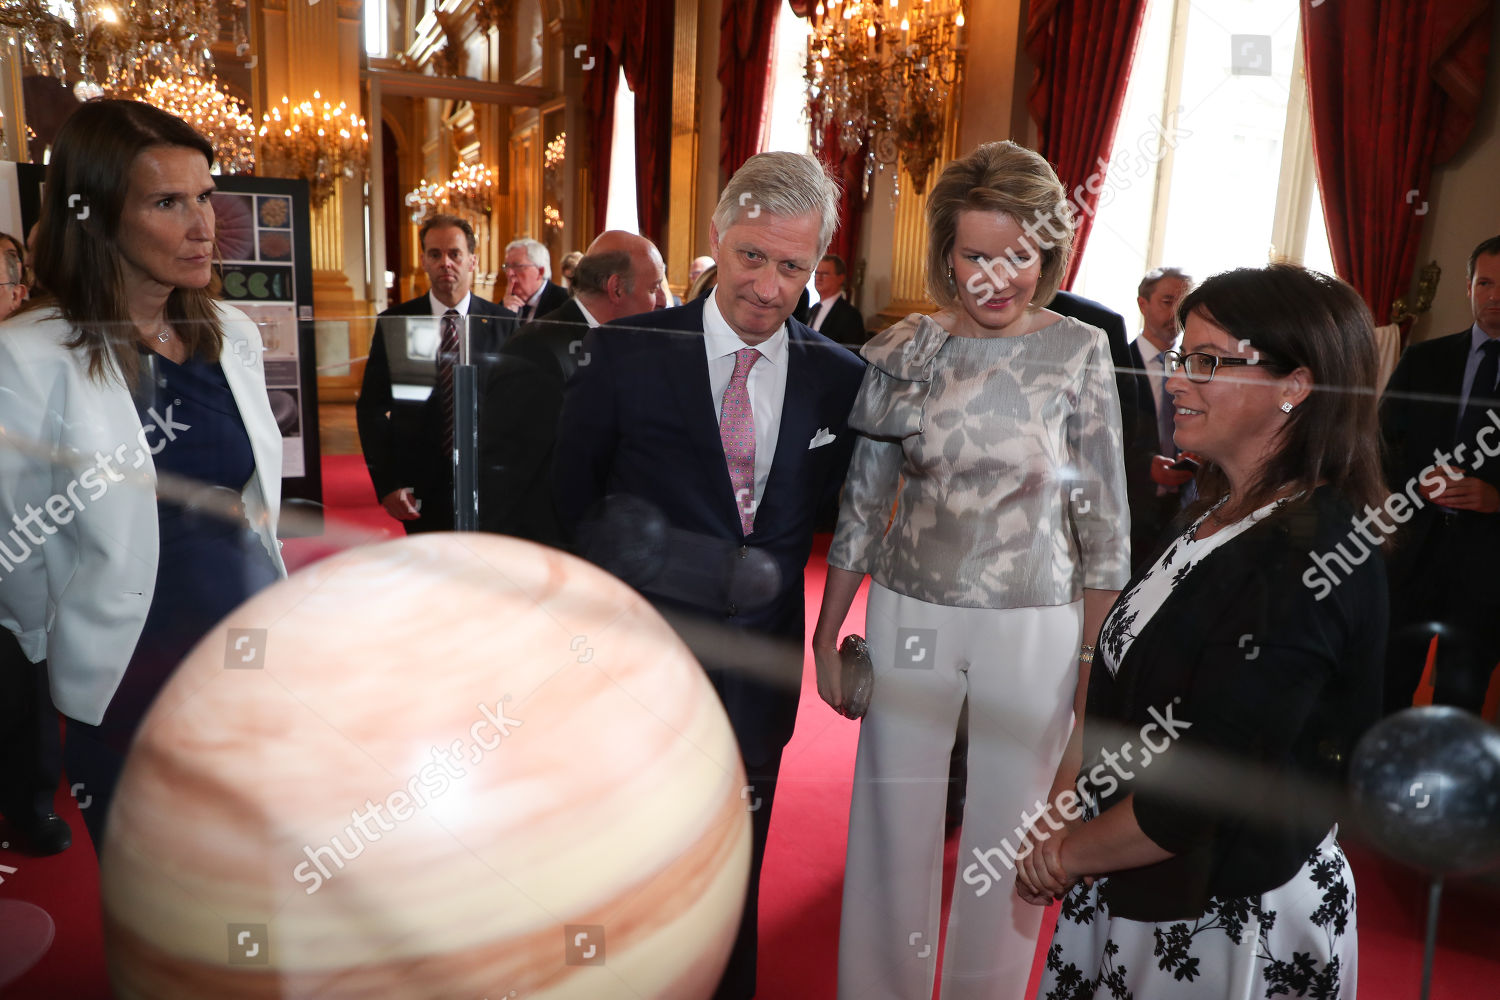 belgian-royals-summer-expo-at-the-royal-palace-brussels-belgium-shutterstock-editorial-10340779a.jpg